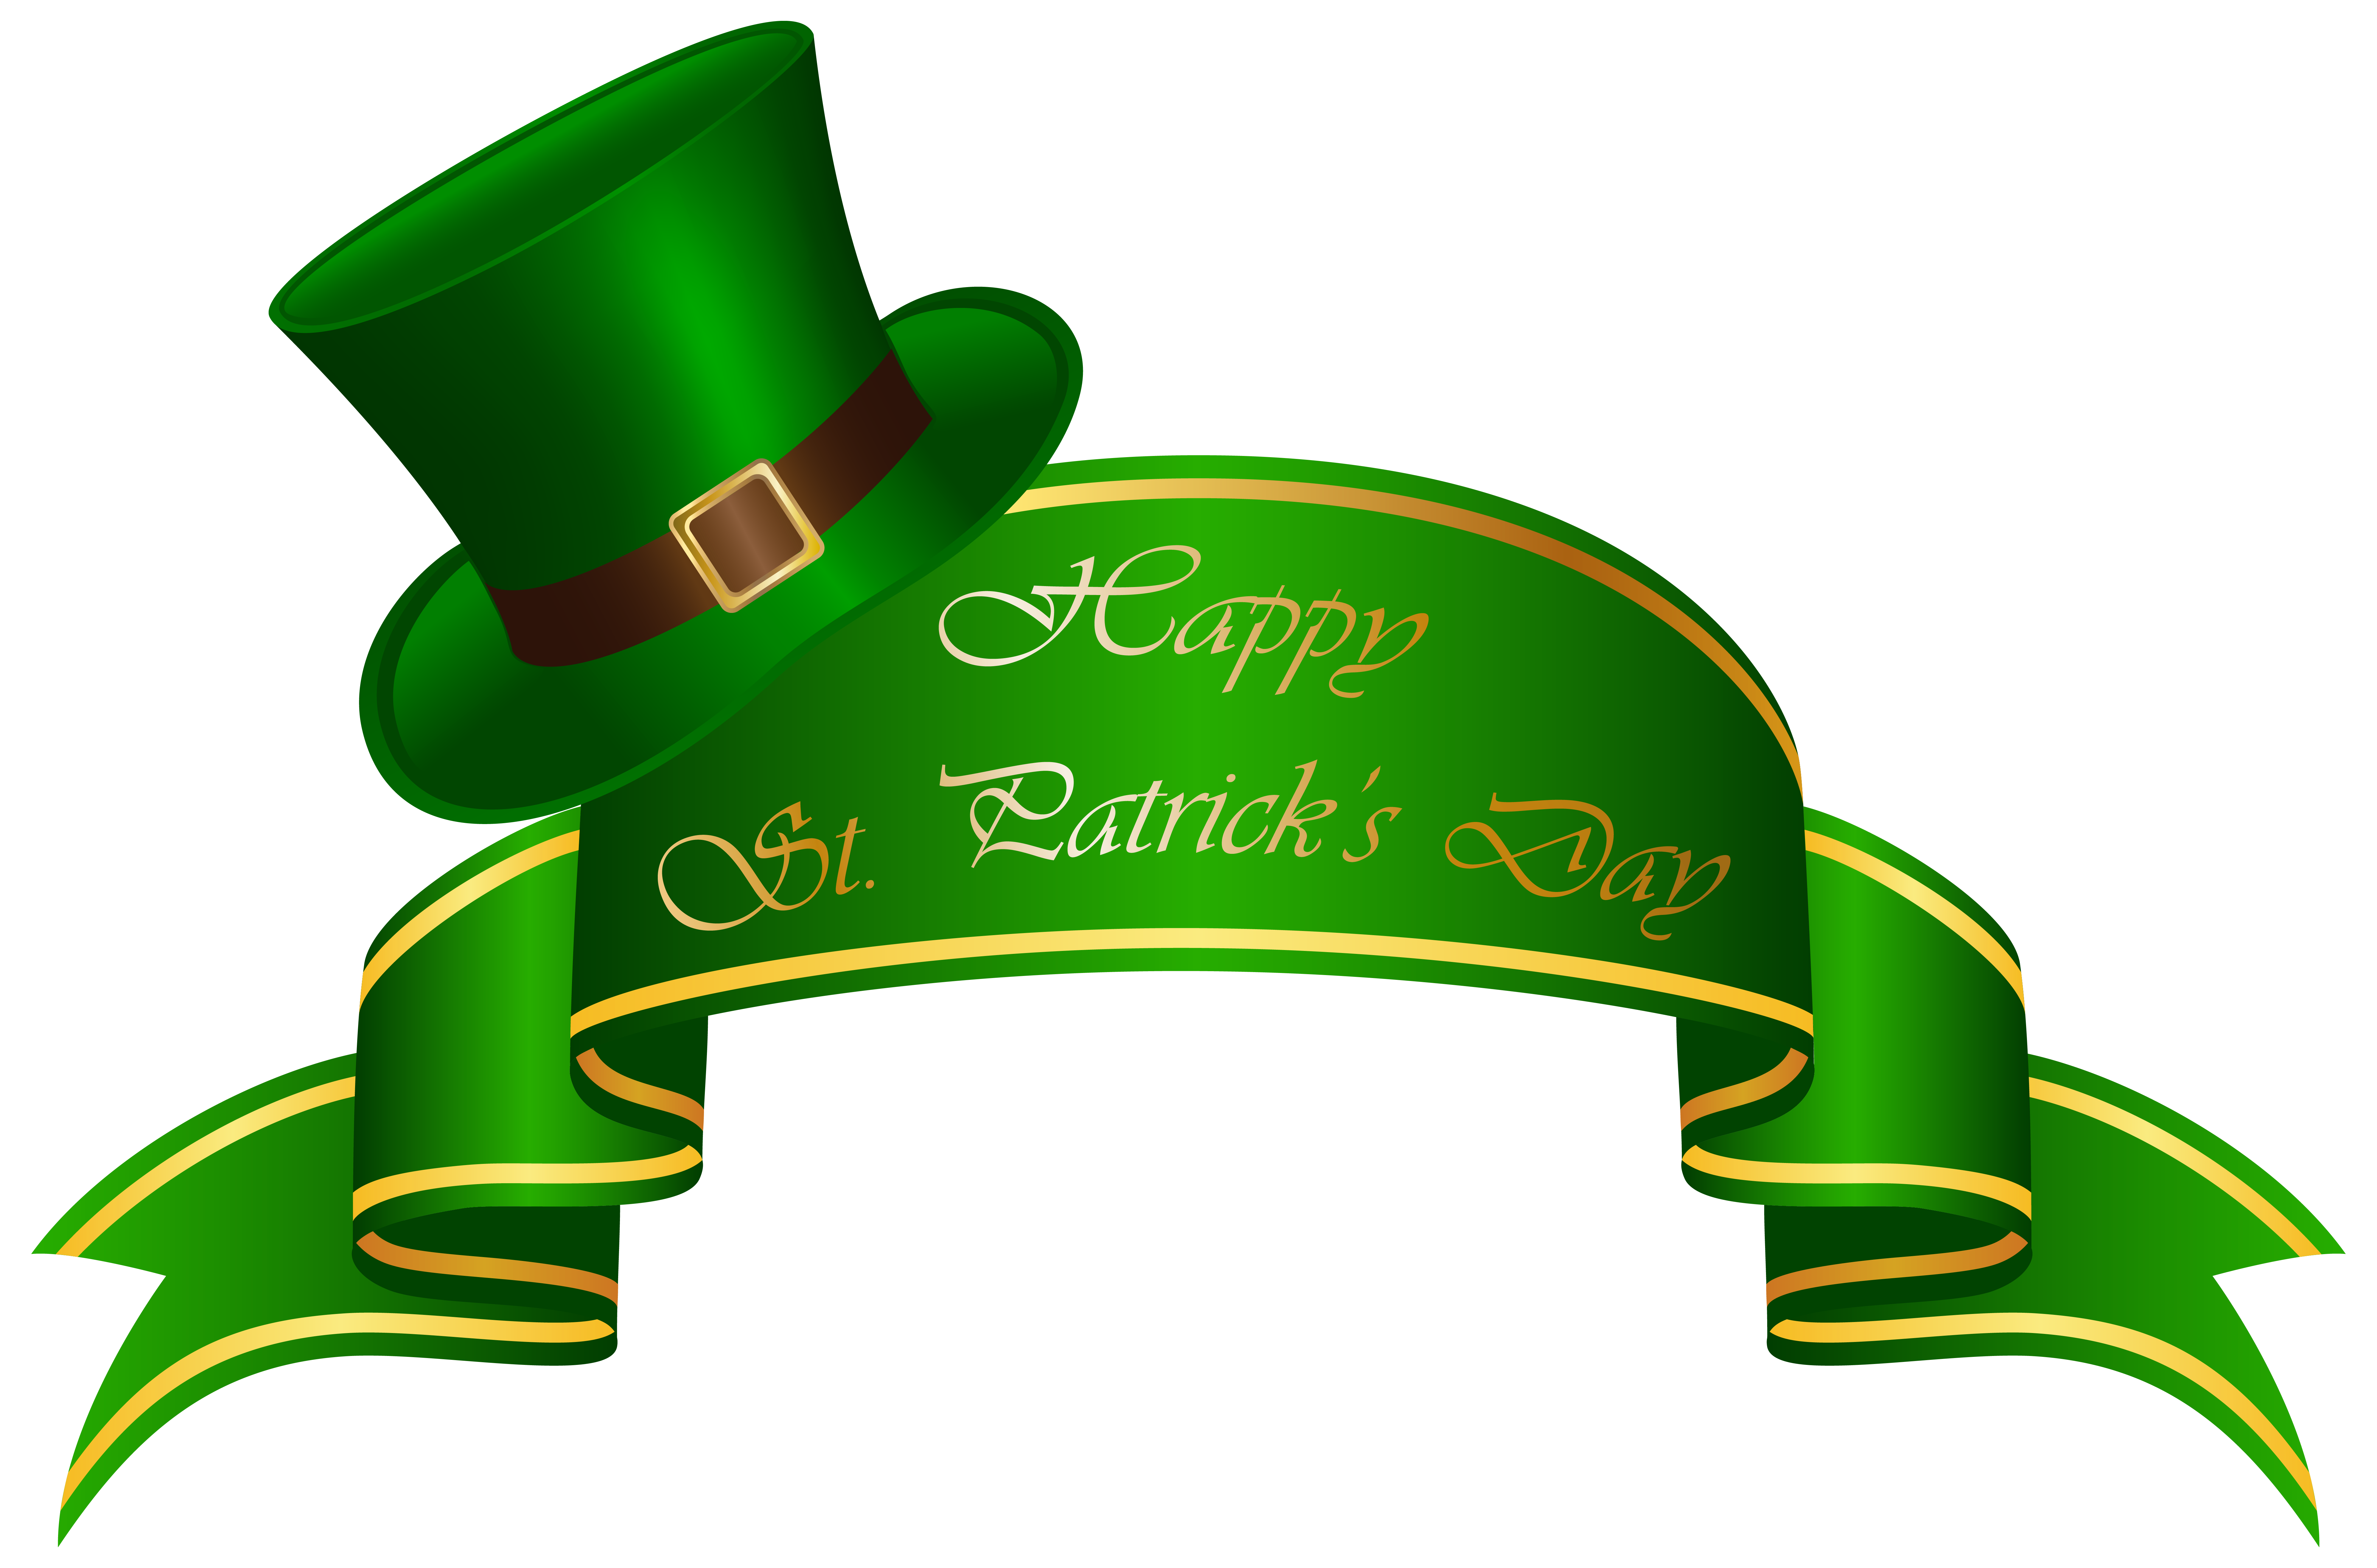 free clipart images st patricks day - photo #48